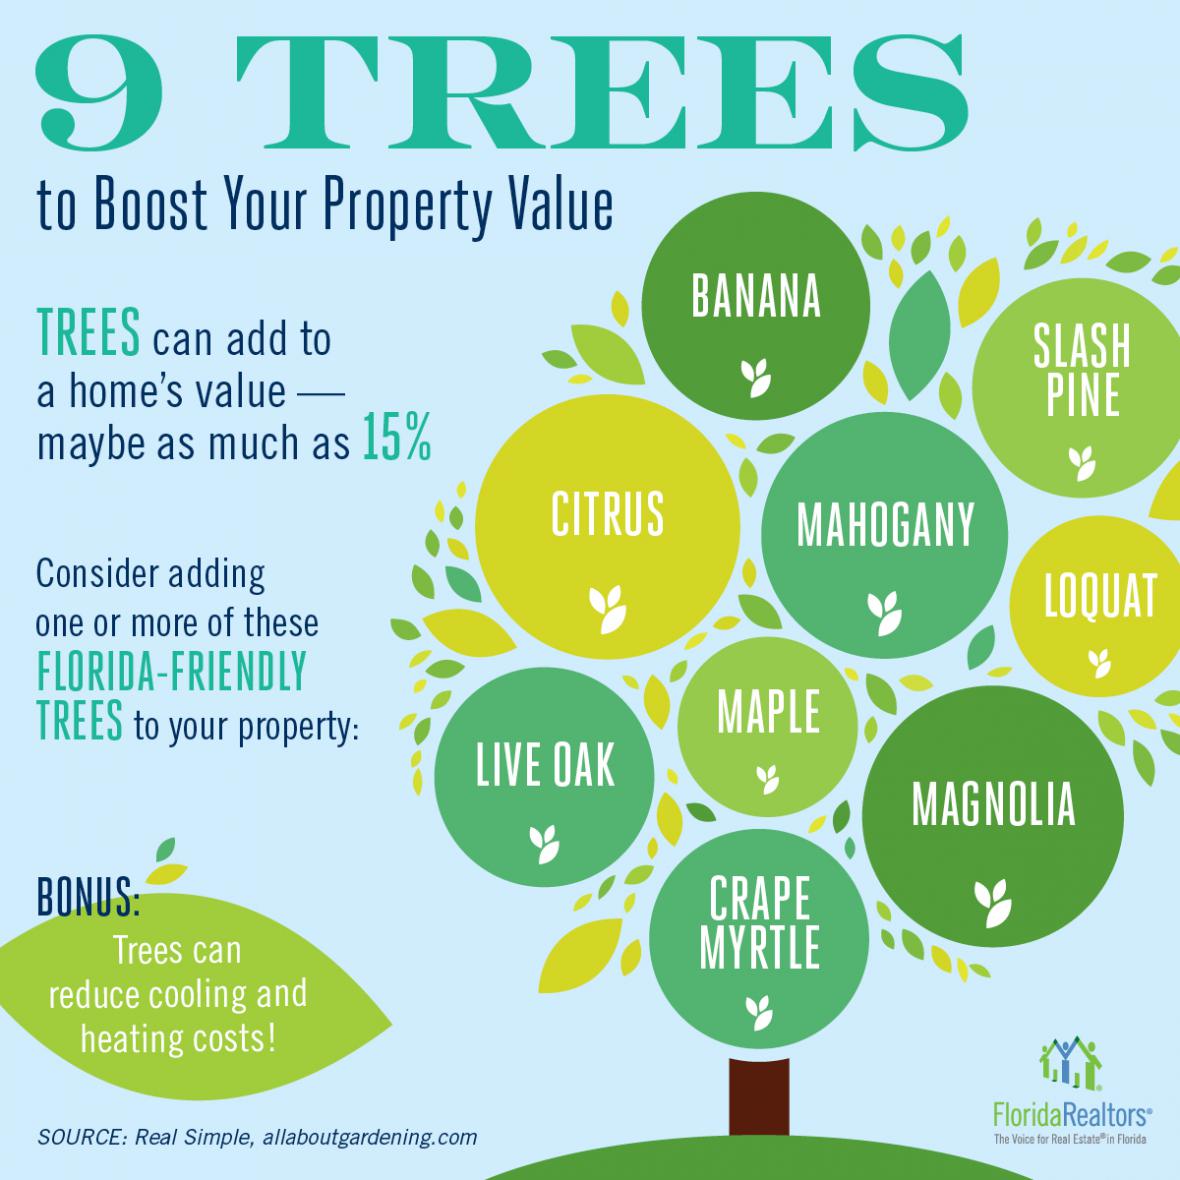 9 Trees to Boost Your Property Value infographic